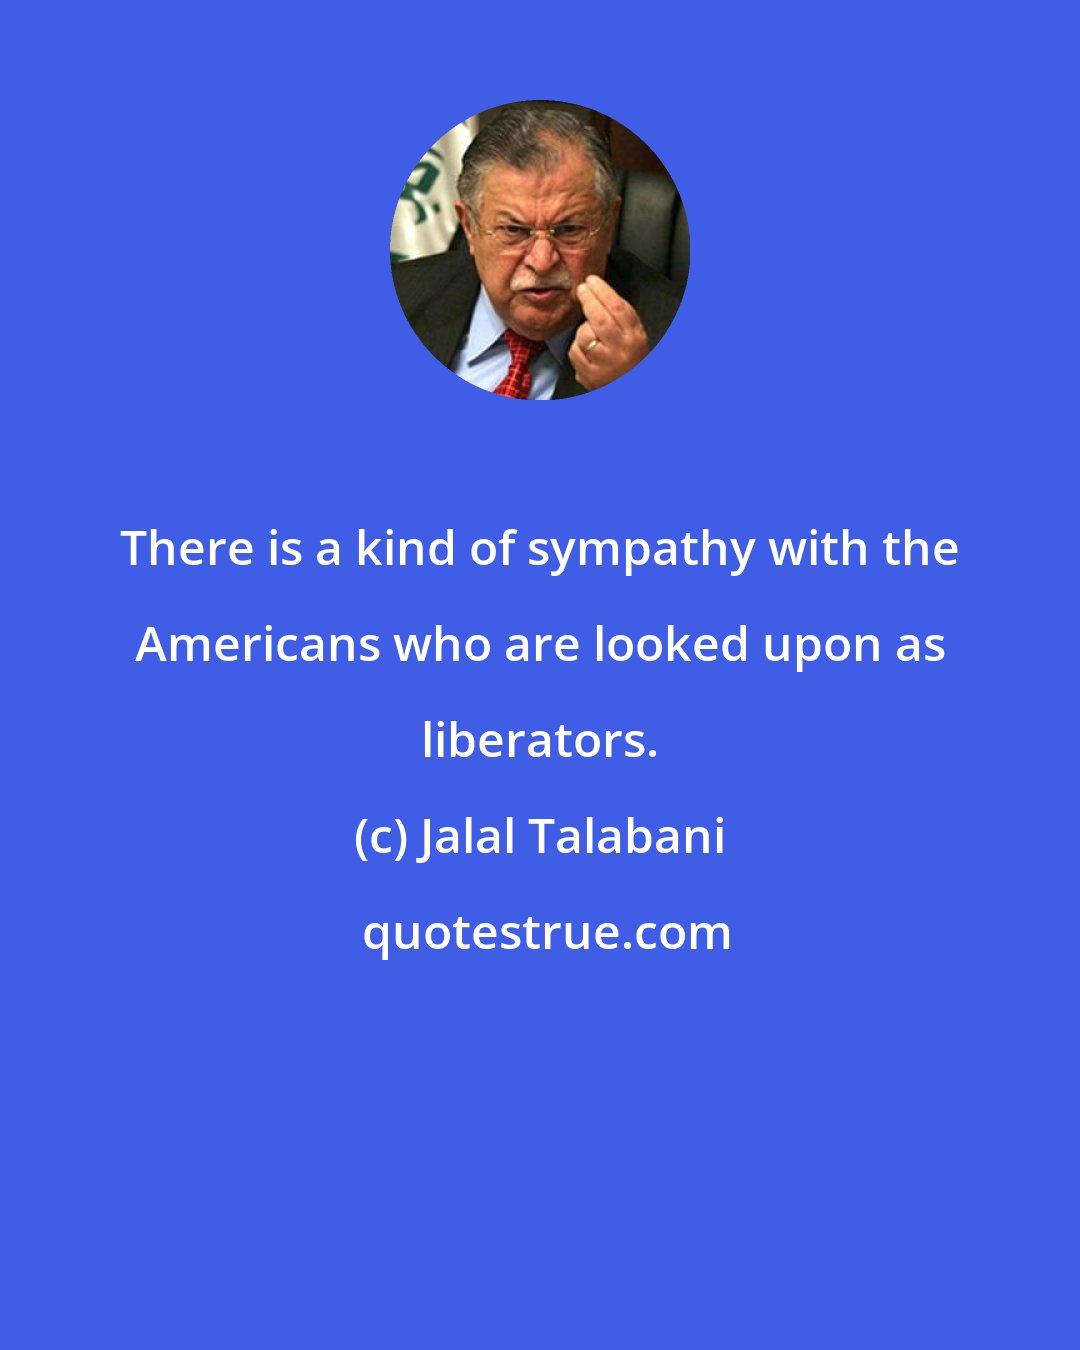 Jalal Talabani: There is a kind of sympathy with the Americans who are looked upon as liberators.